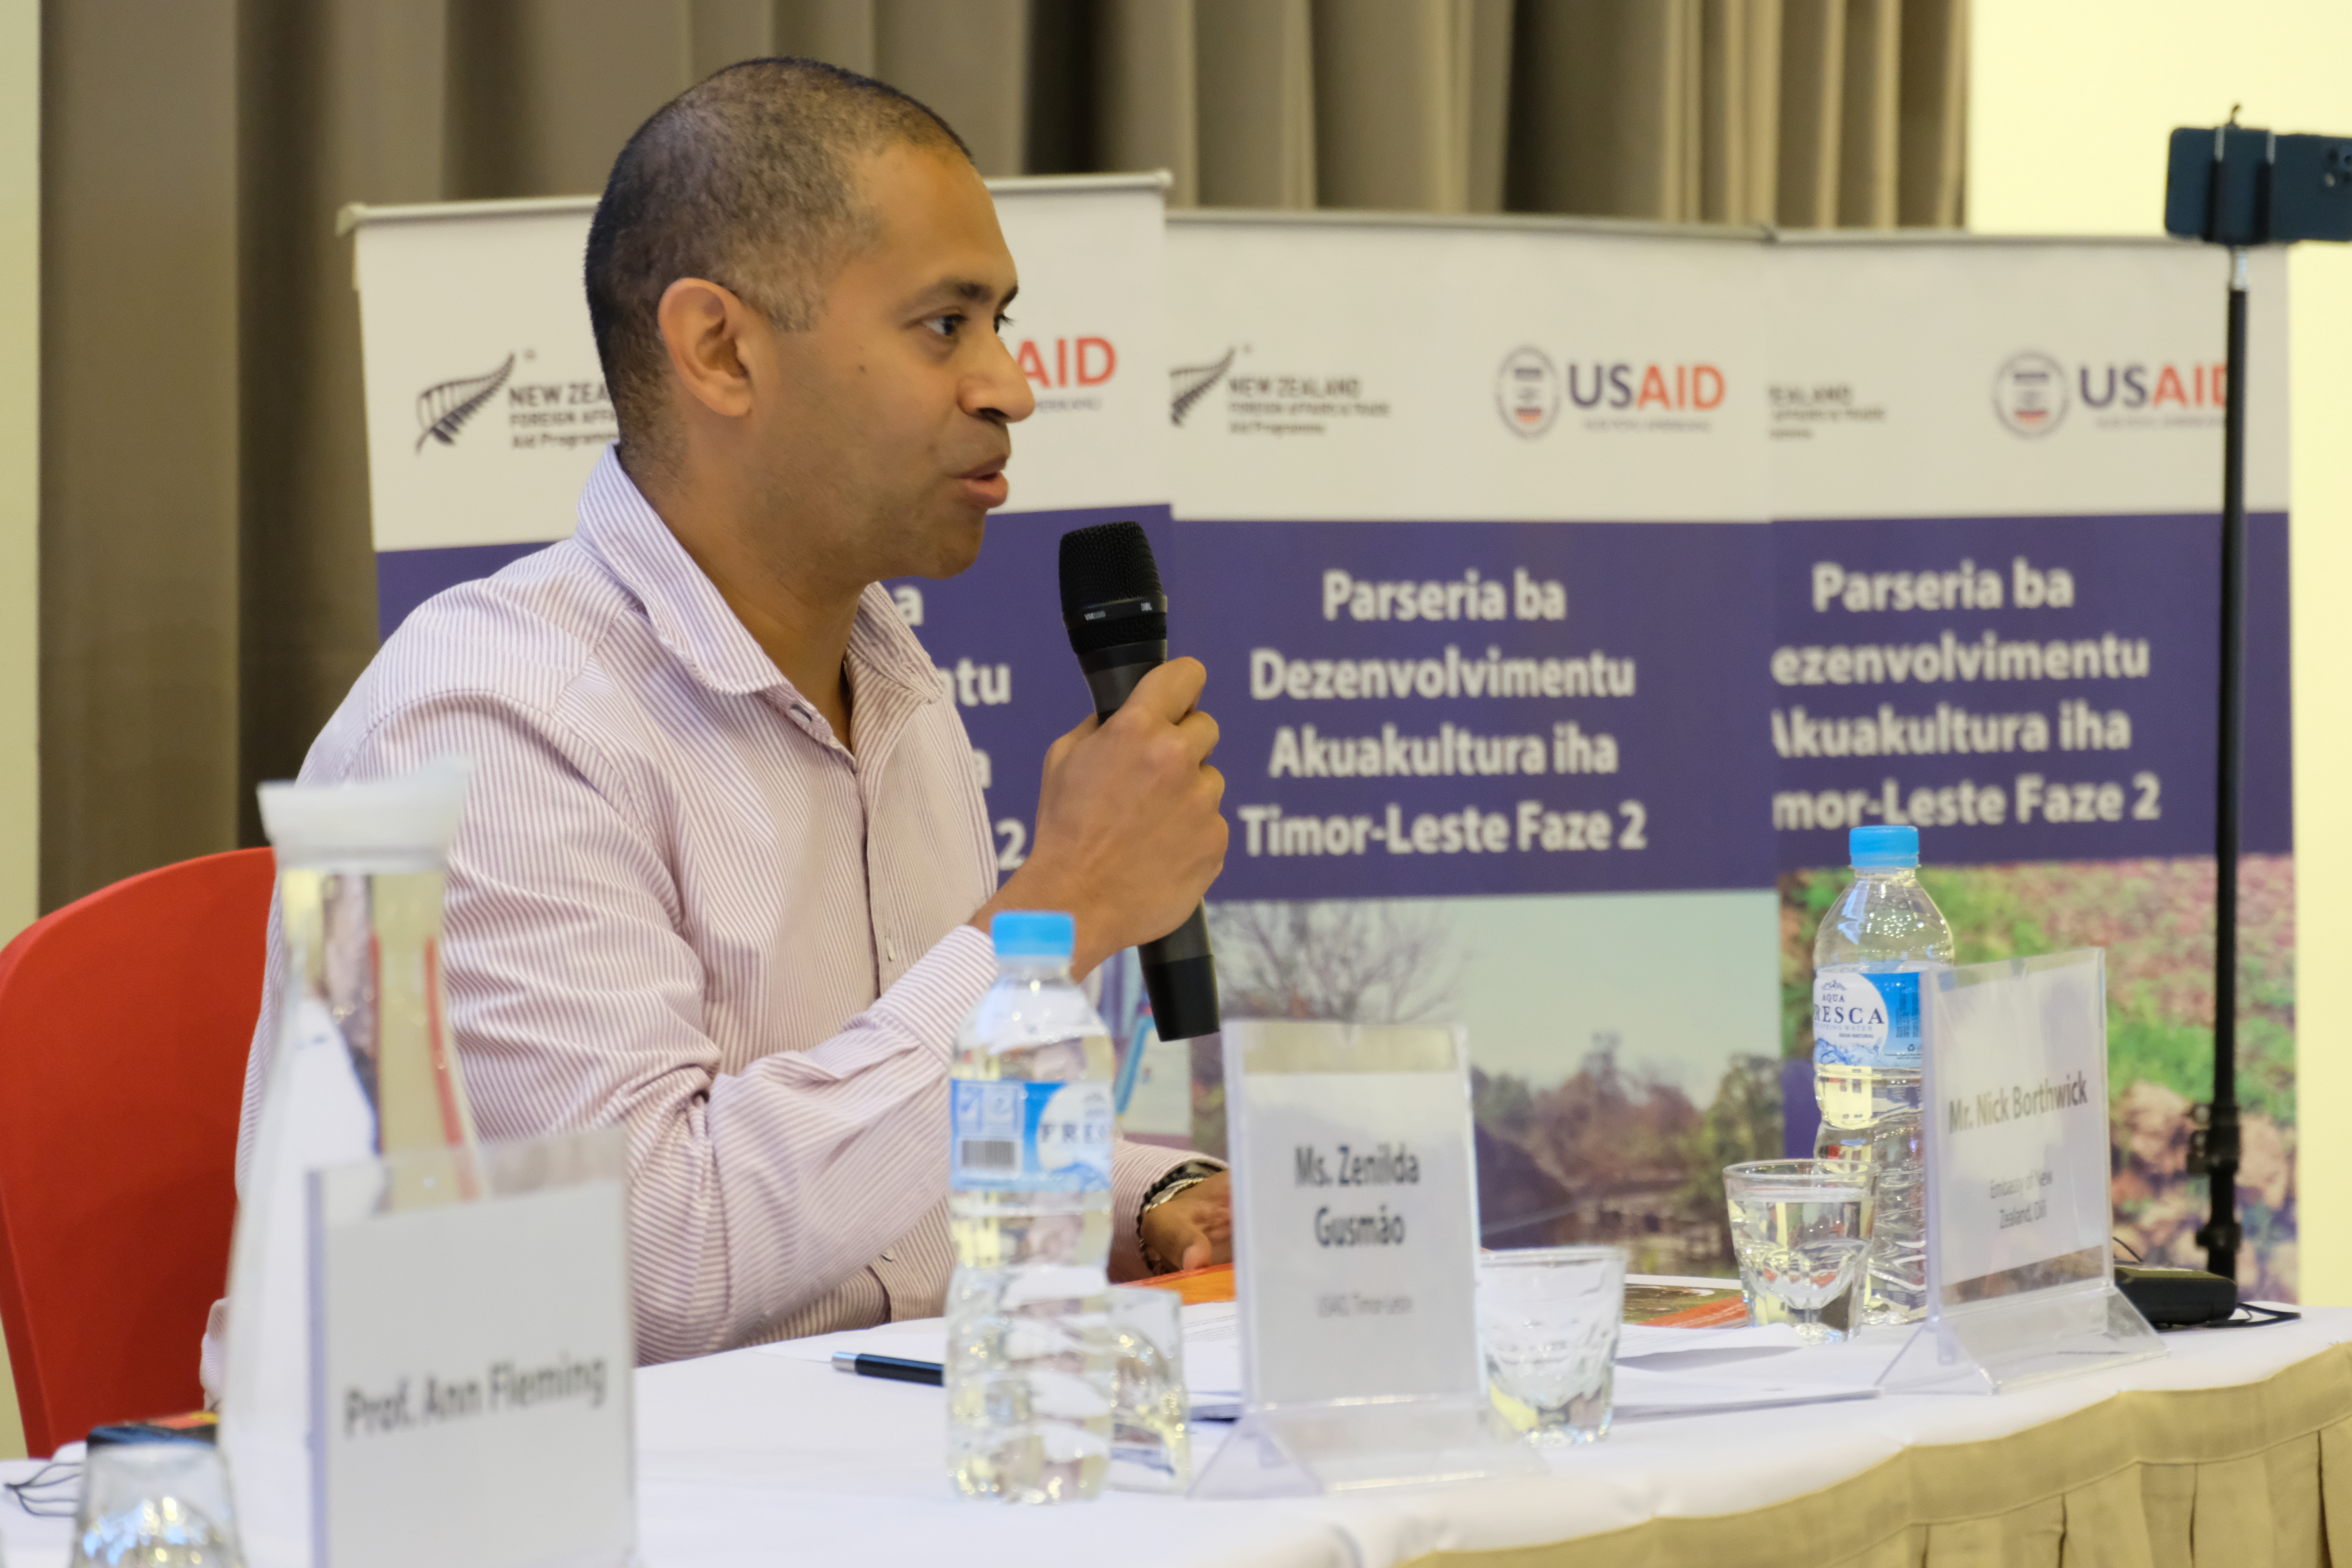 Nick Borthwick, Deputy Head of Mission, Embassy of New Zealand, speaking on the funding opportunities for aquaculture development in Timor-Leste.